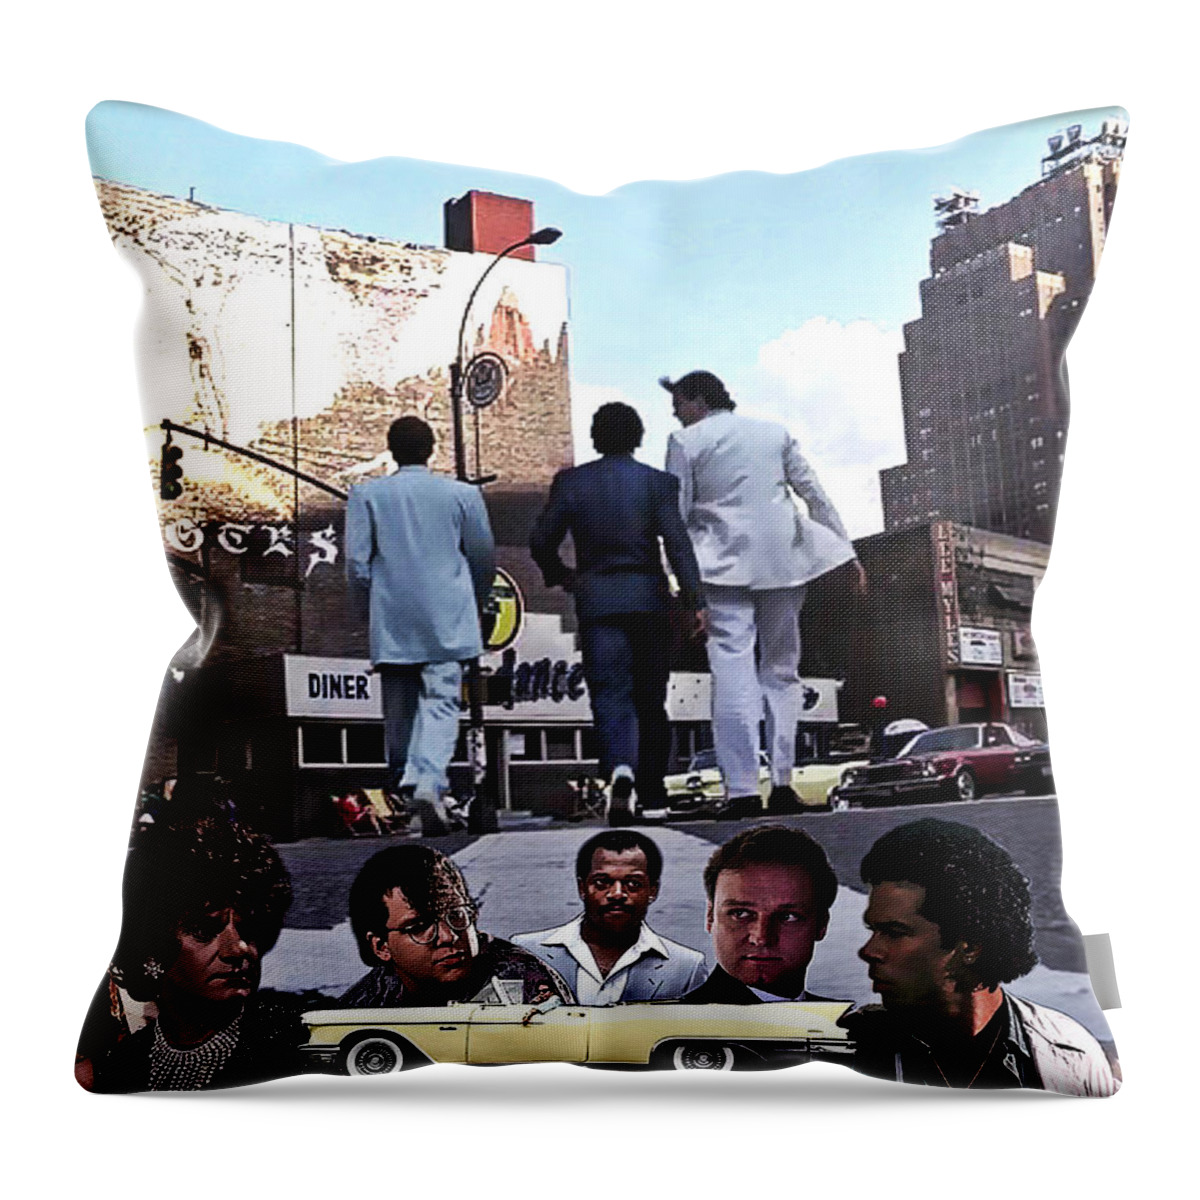 Miami Vice Throw Pillow featuring the digital art The Prodigal Son 4 by Mark Baranowski